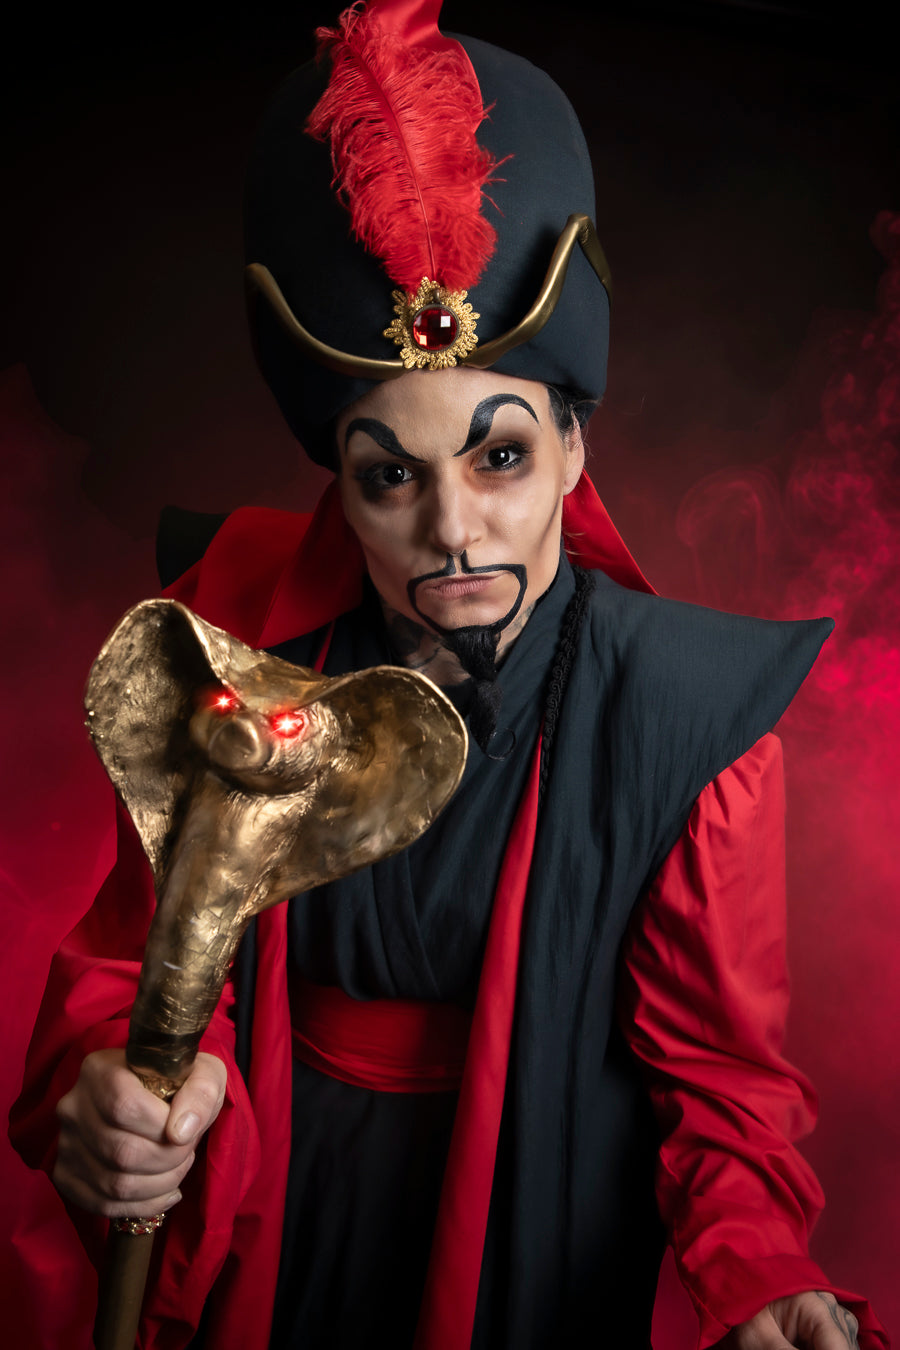 Evil Sorcerer Jafar, Disney Villain from Aladdin Costume Hire or Cosplay, plus Makeup and Photography. Proudly by and available at, Little Shop of Horrors Costumery 6/1 Watt Rd Mornington & Melbourne